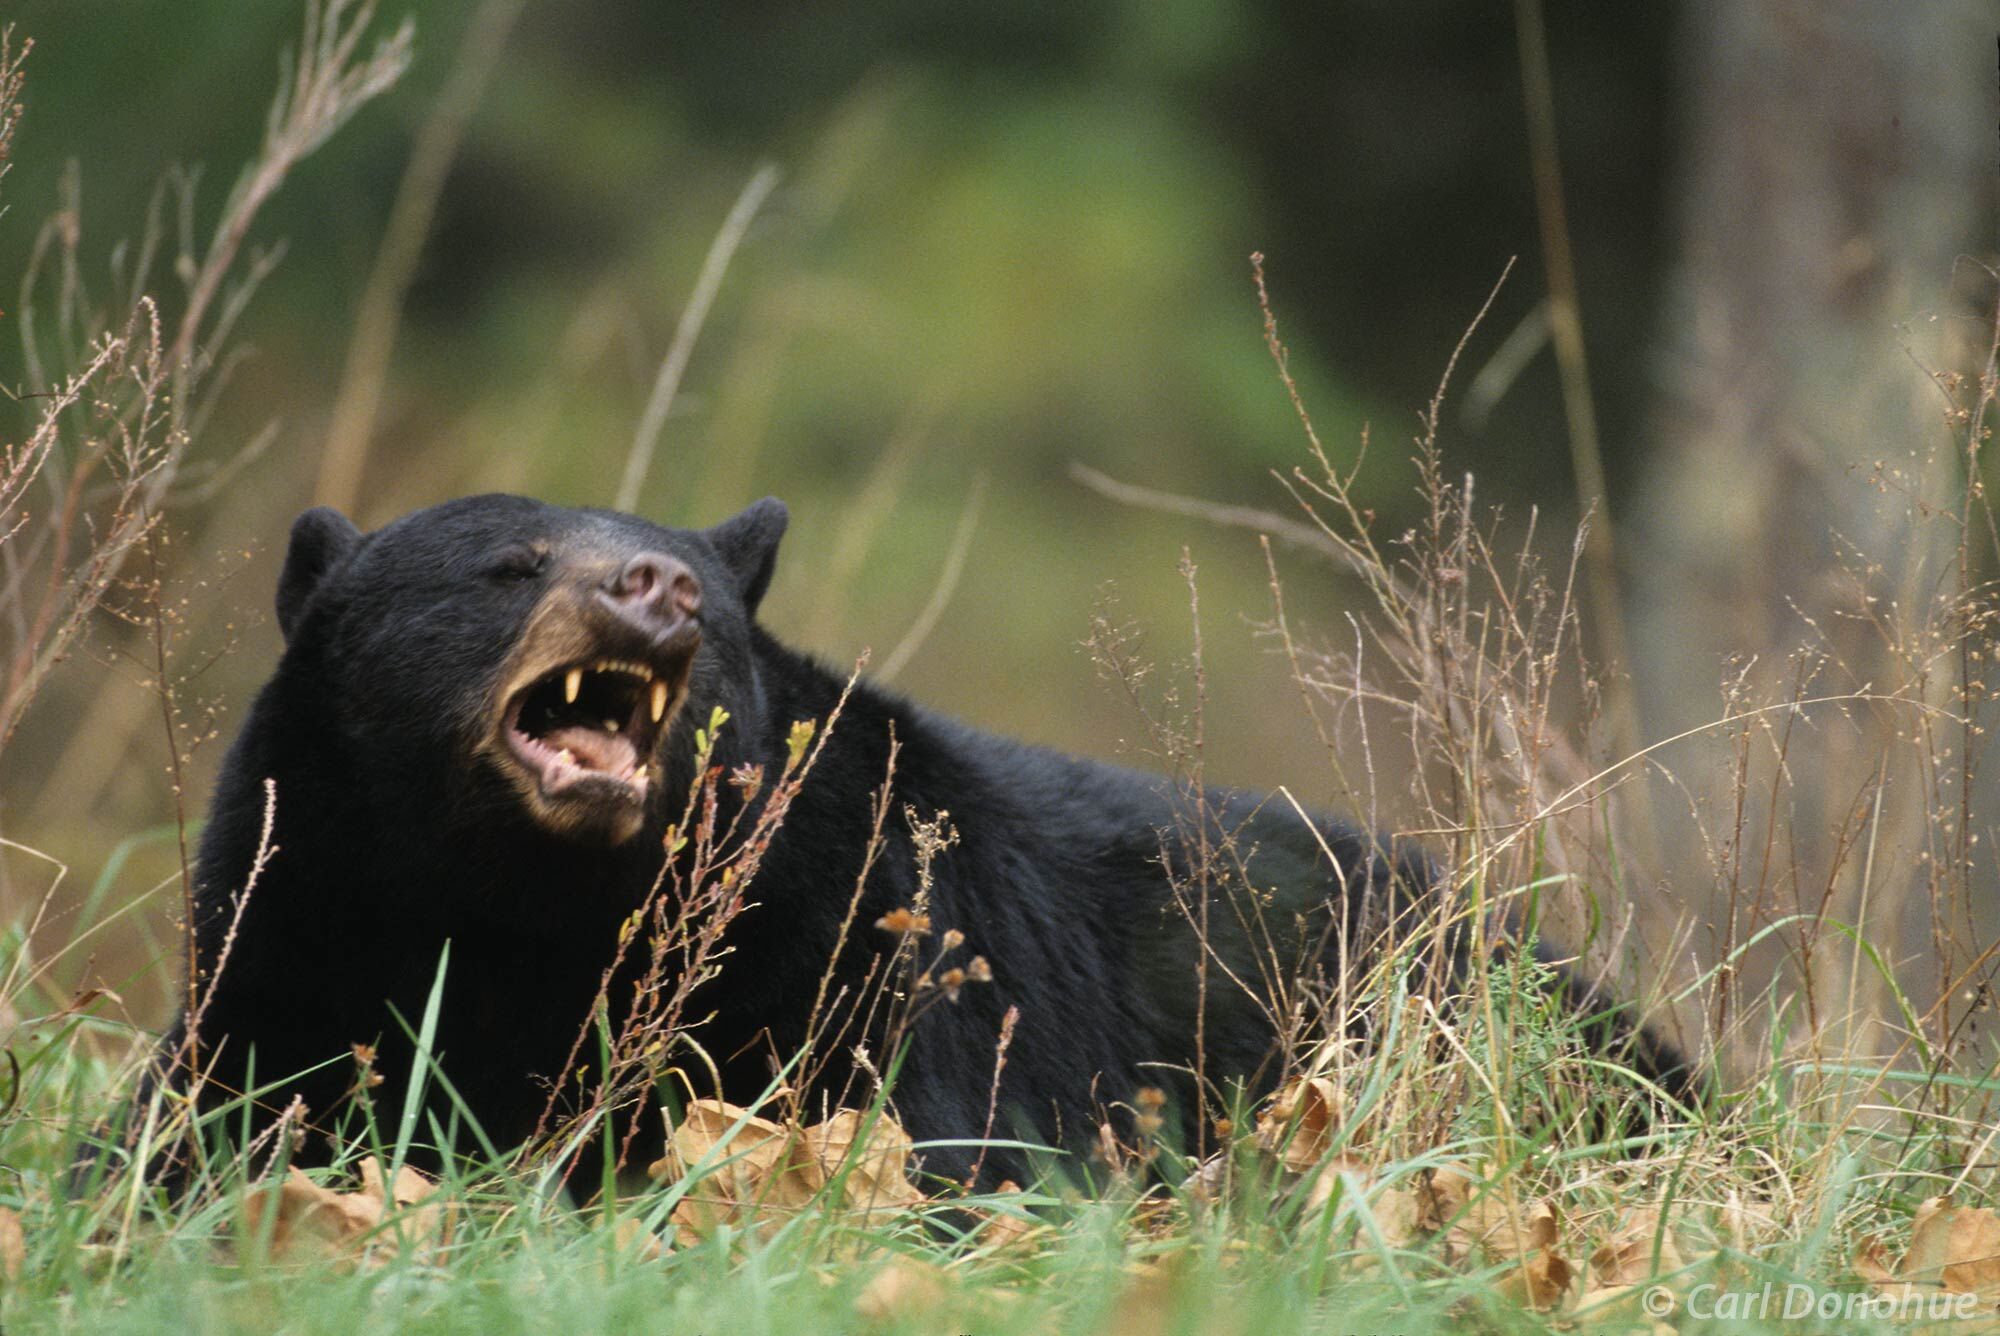 Black bear eating walnuts, Cades Cove, Great Smoky Mountains National Prk, Tennessee. Ursus americanus.